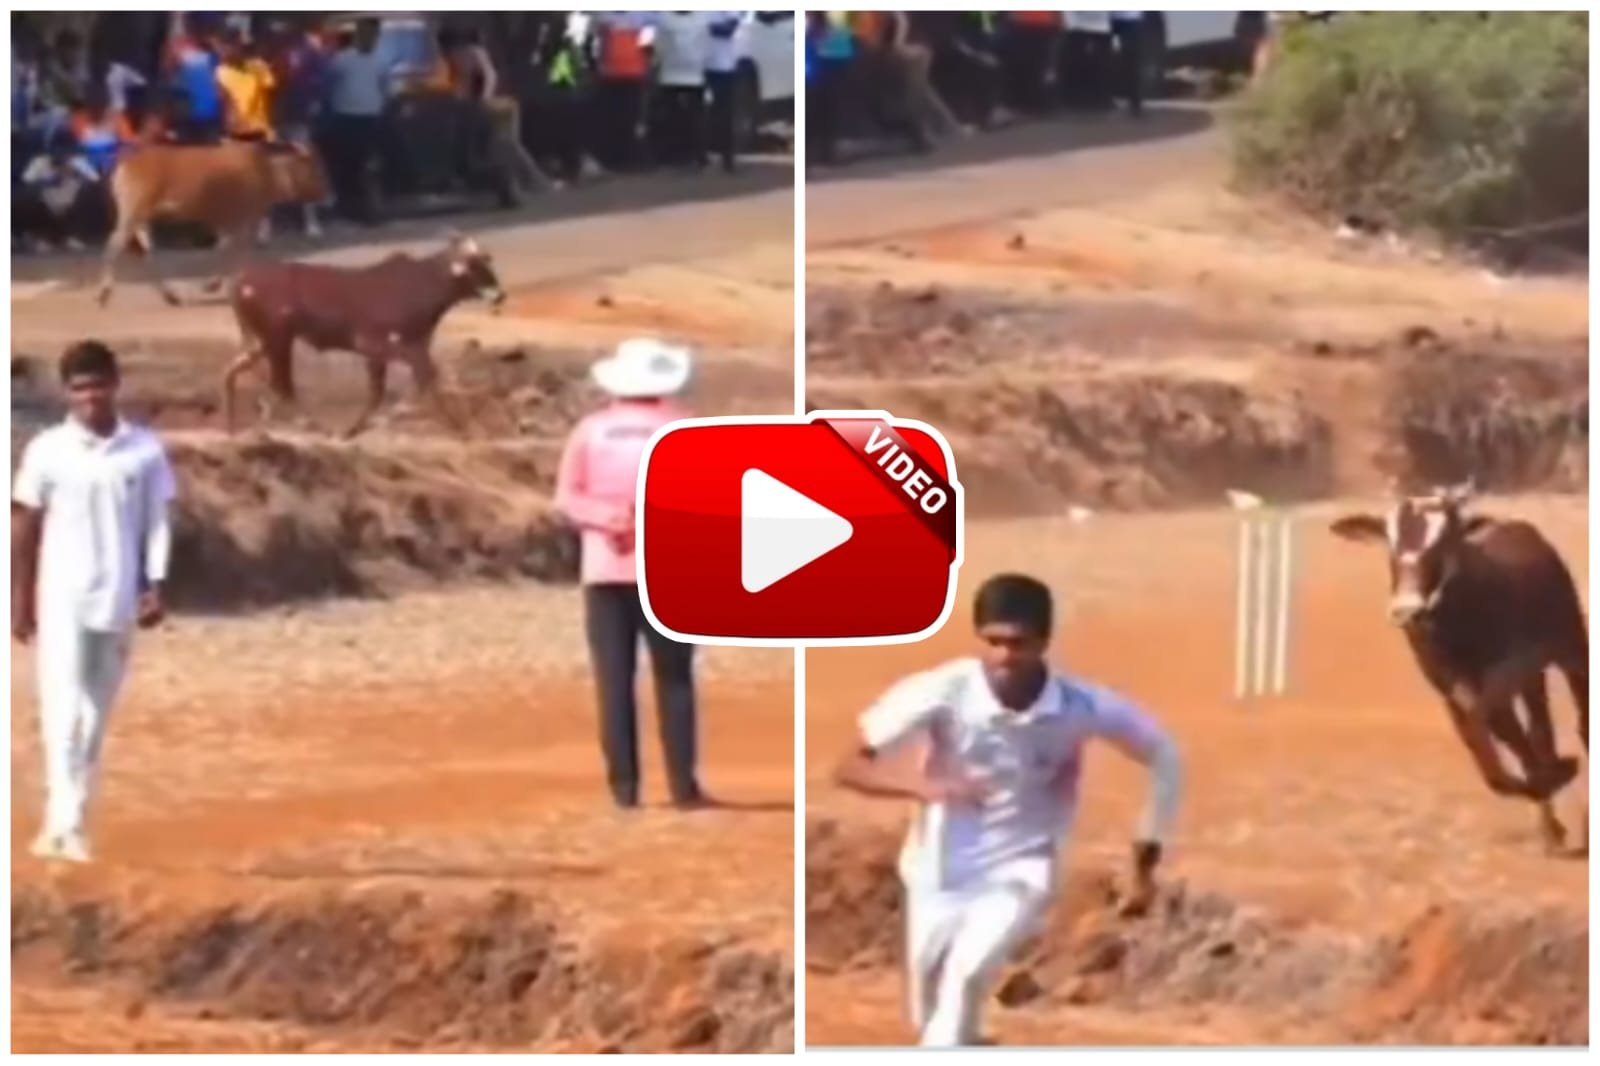 Video of bull - Bull created havoc on YouTube by entering cricket field